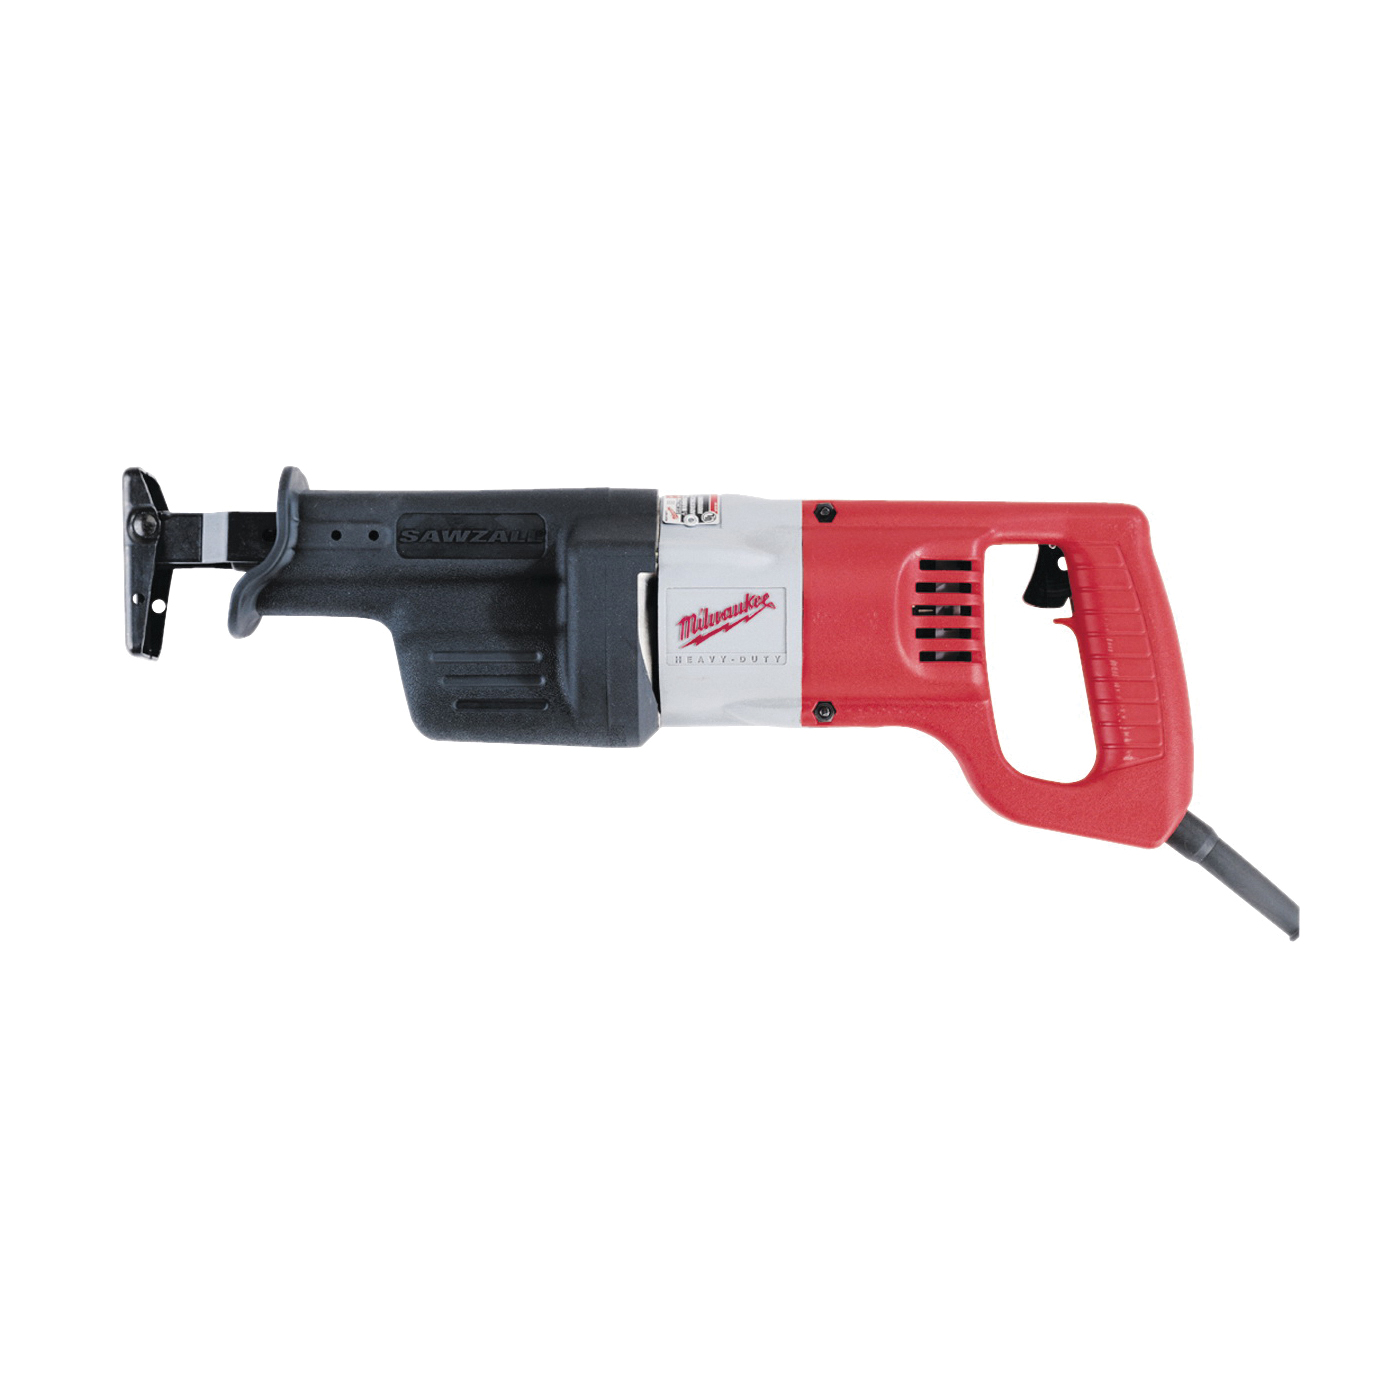 Milwaukee 6509-31 Reciprocating Saw Kit, 12 A, 3/4 in L Stroke, 0 to 3000 spm, Includes: Carrying Case